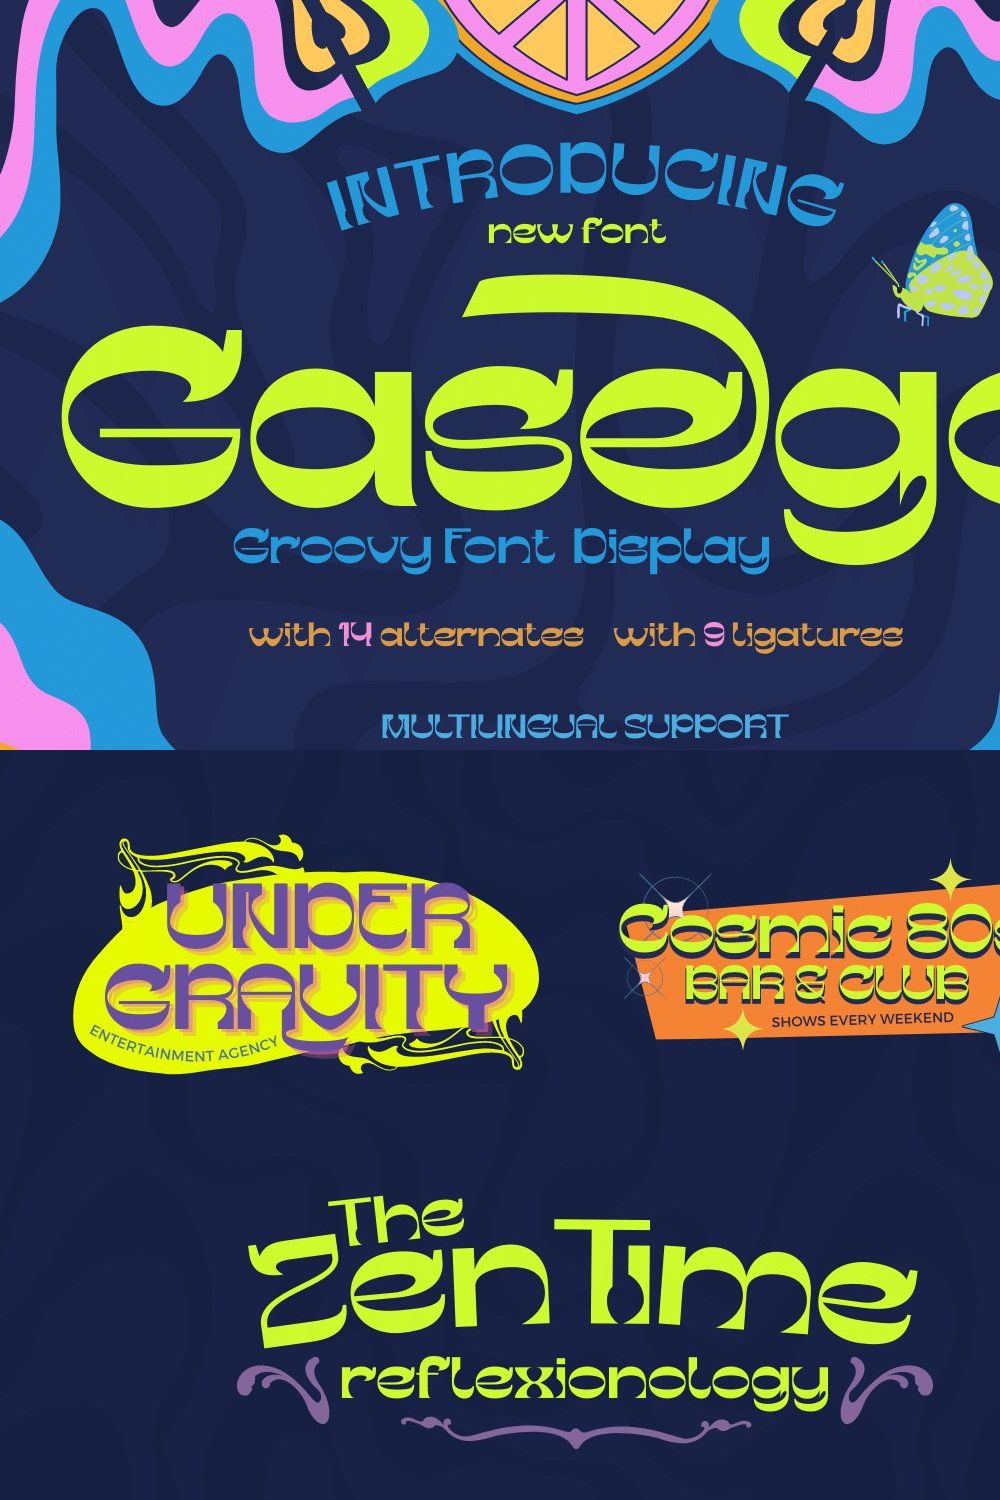 Gesego | Groovy Retro Font pinterest preview image.